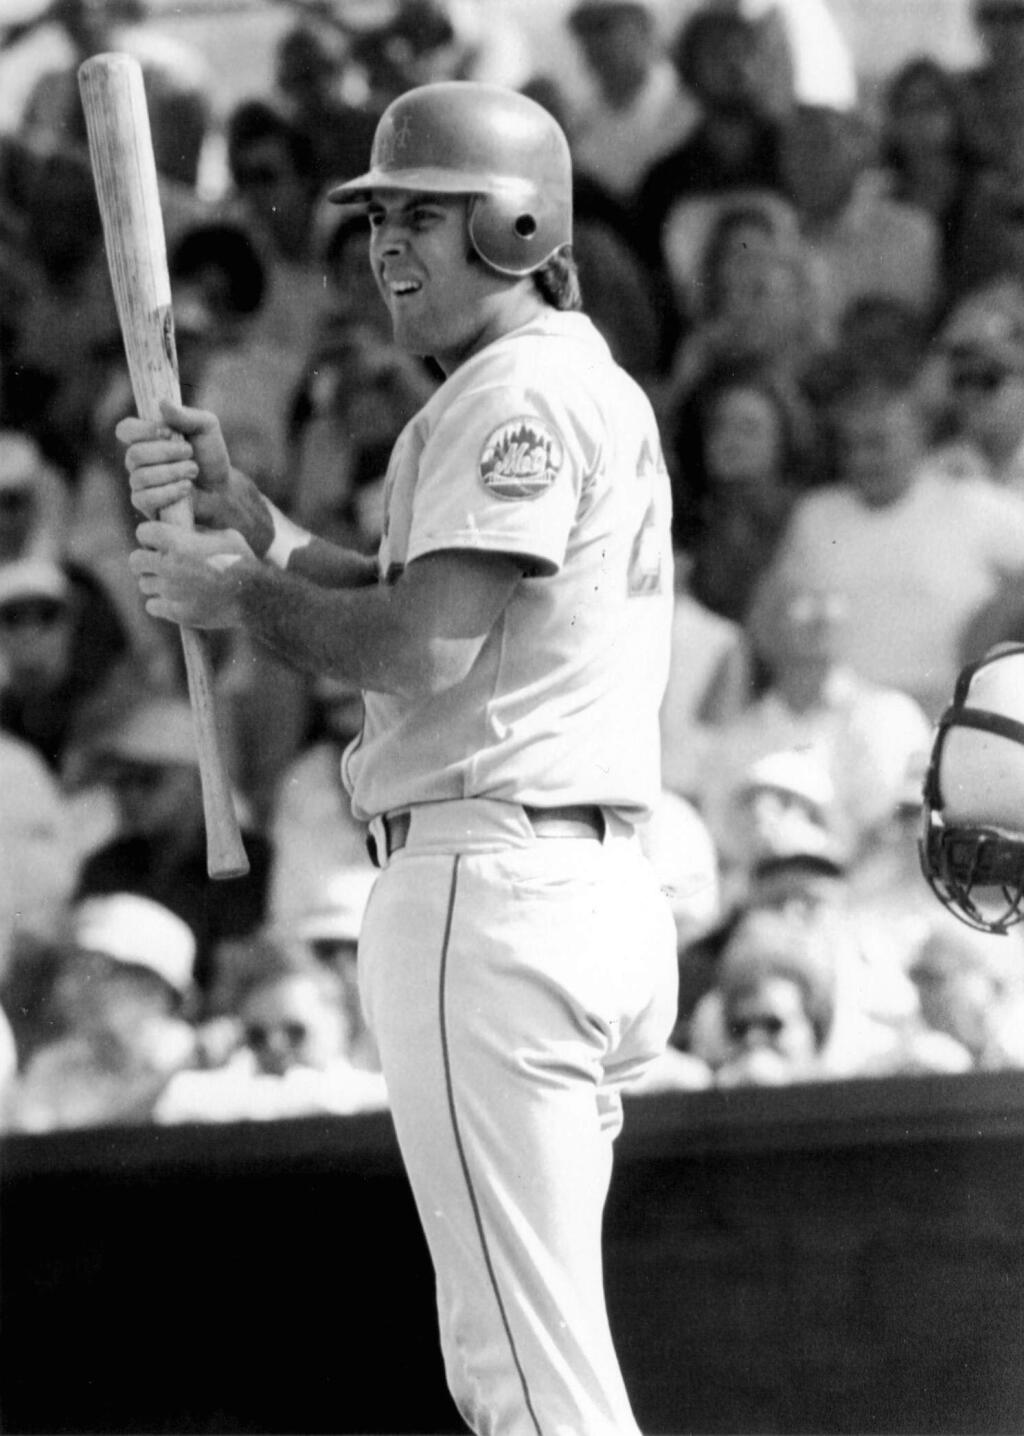 Marshall Brant up to bat for the Mets. He was drafted for the Mets in the fourth round of the 1975 draft. (Courtesy of Marshall Brant)